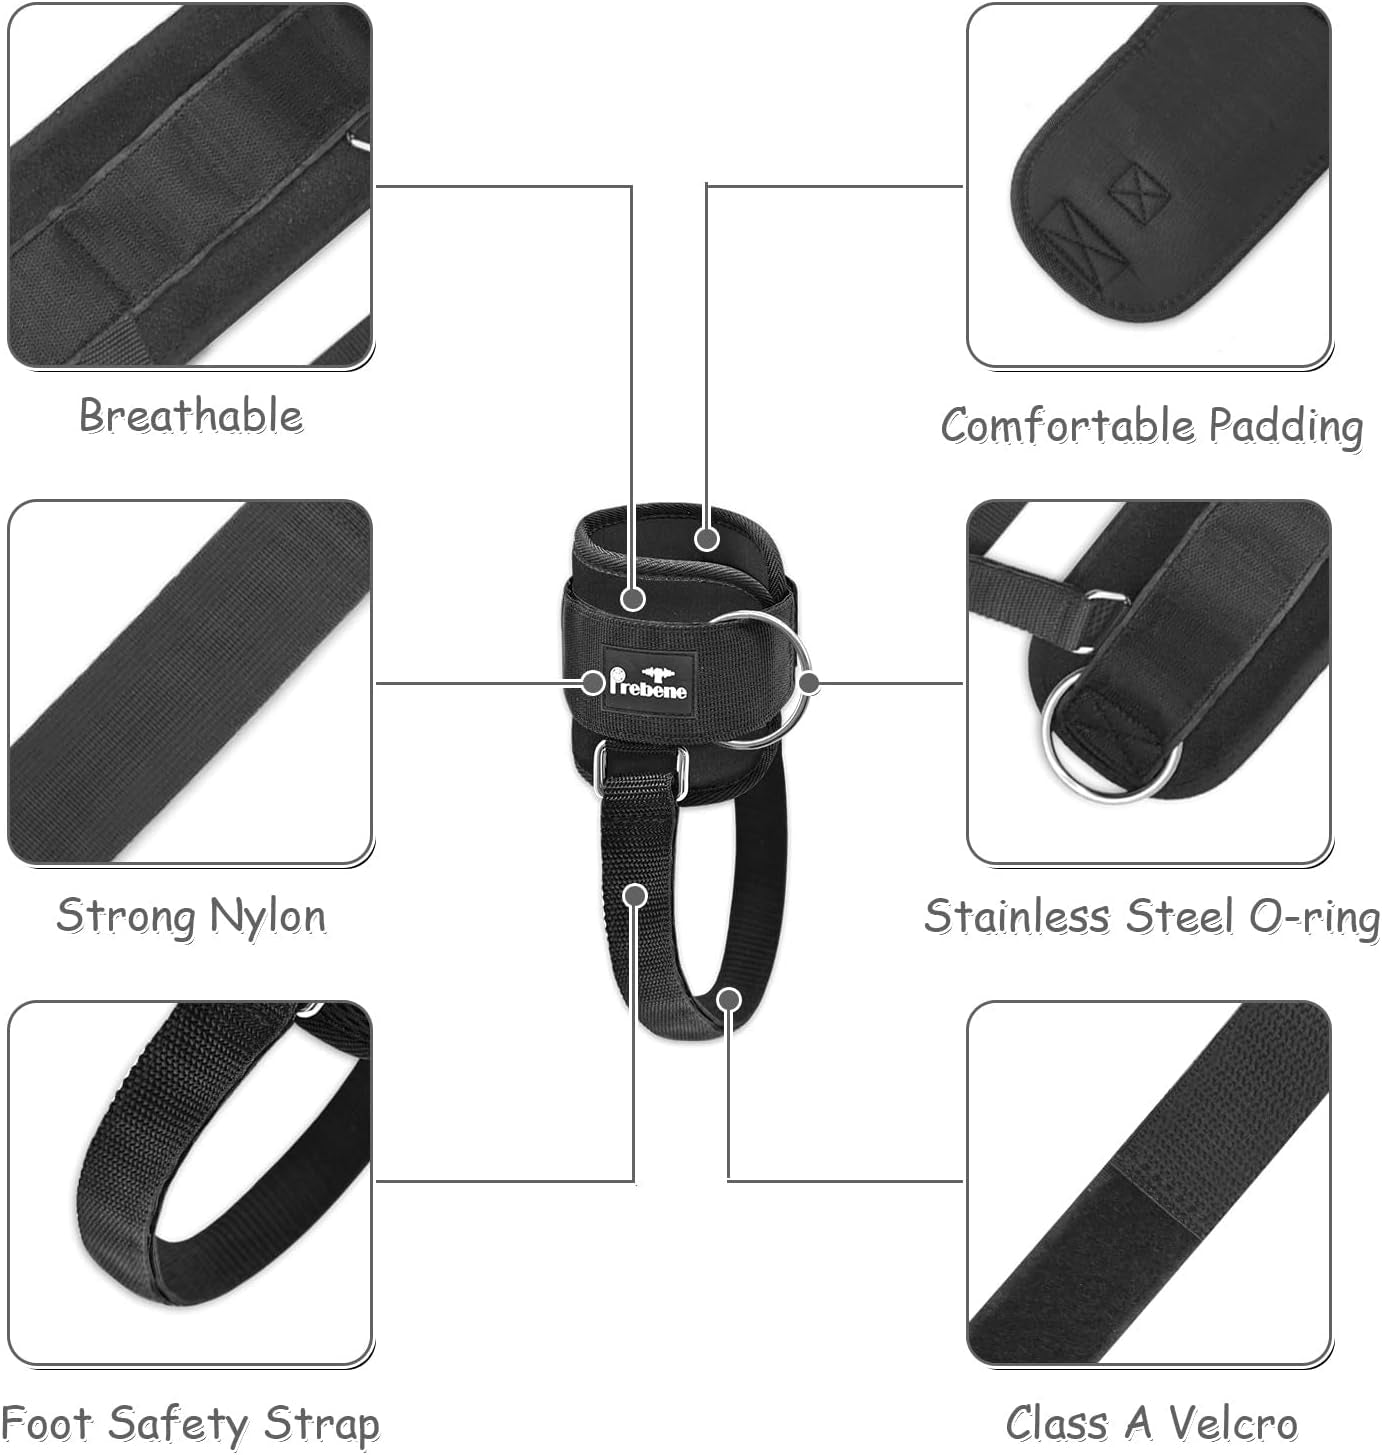 Ankle Strap for Cable Machines, Adaptive O-Ring for Glute & Leg Workouts